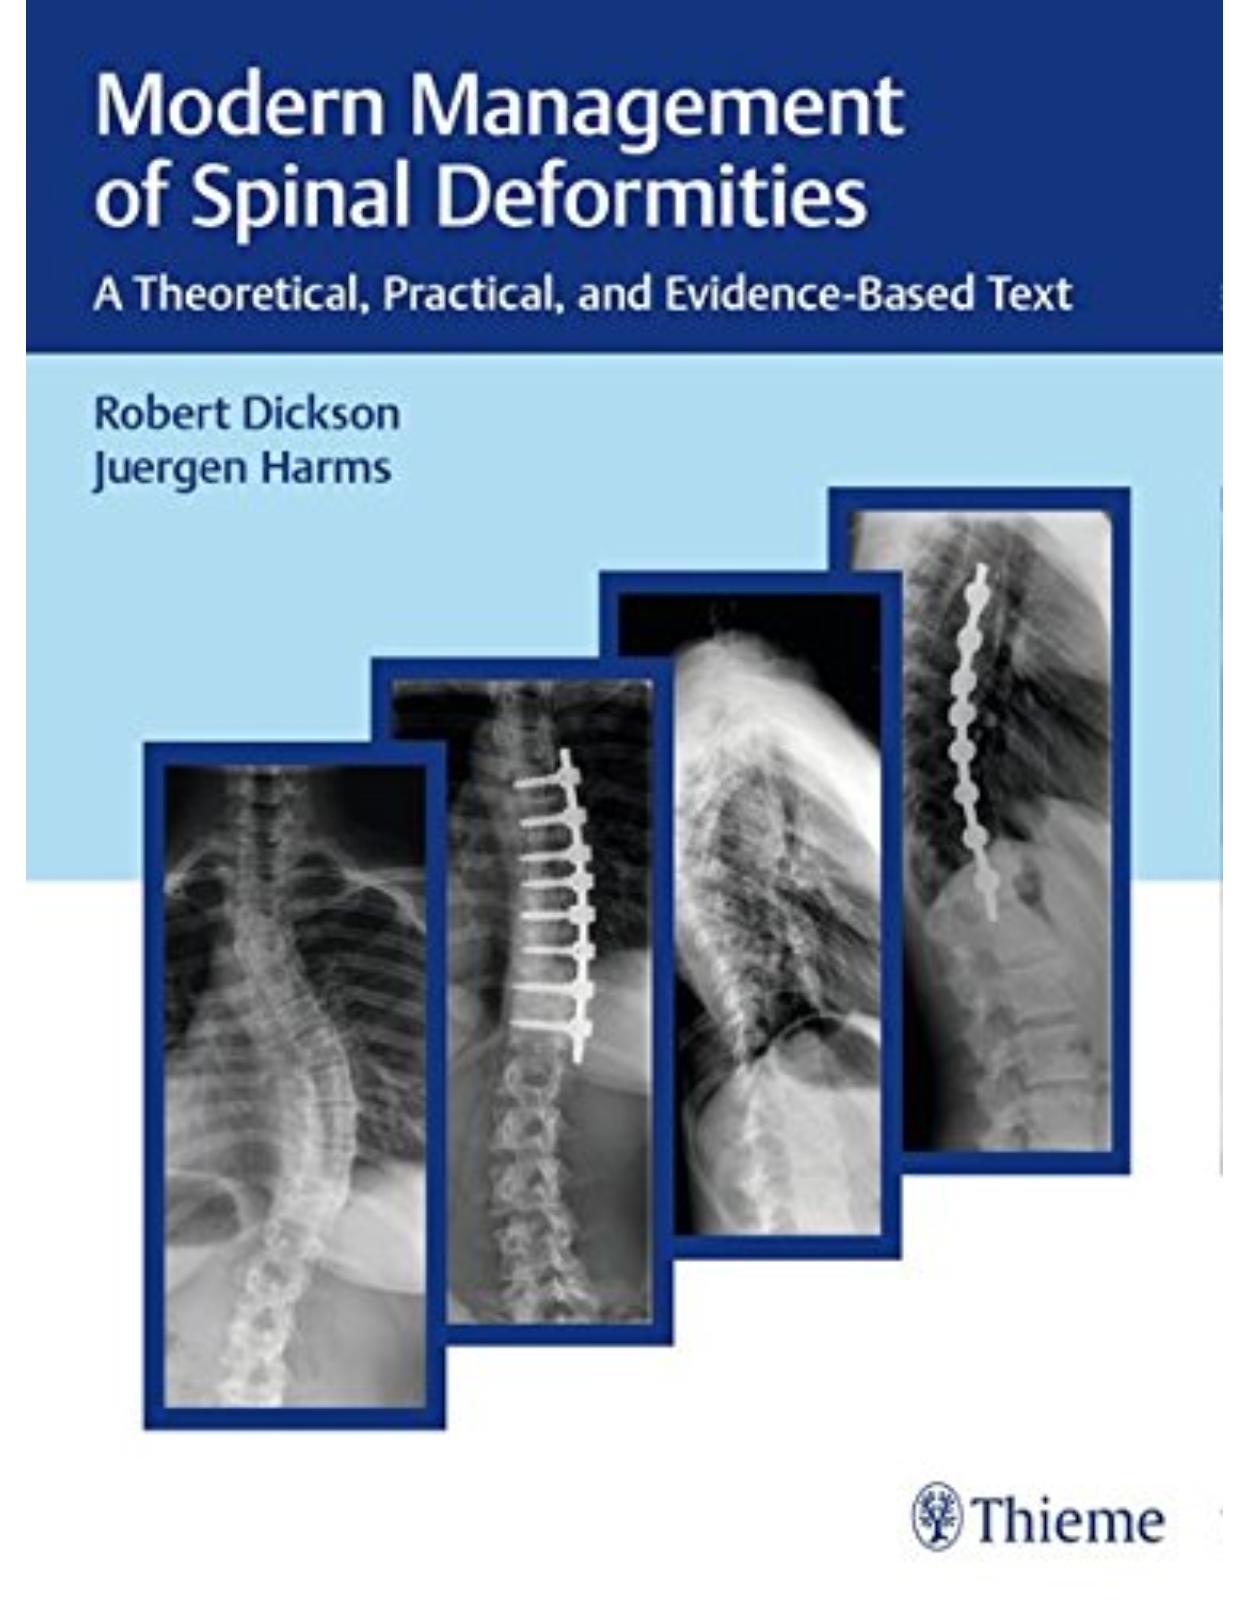 Modern Management of Spinal Deformities: A Theoretical, Practical, and Evidence-based Text